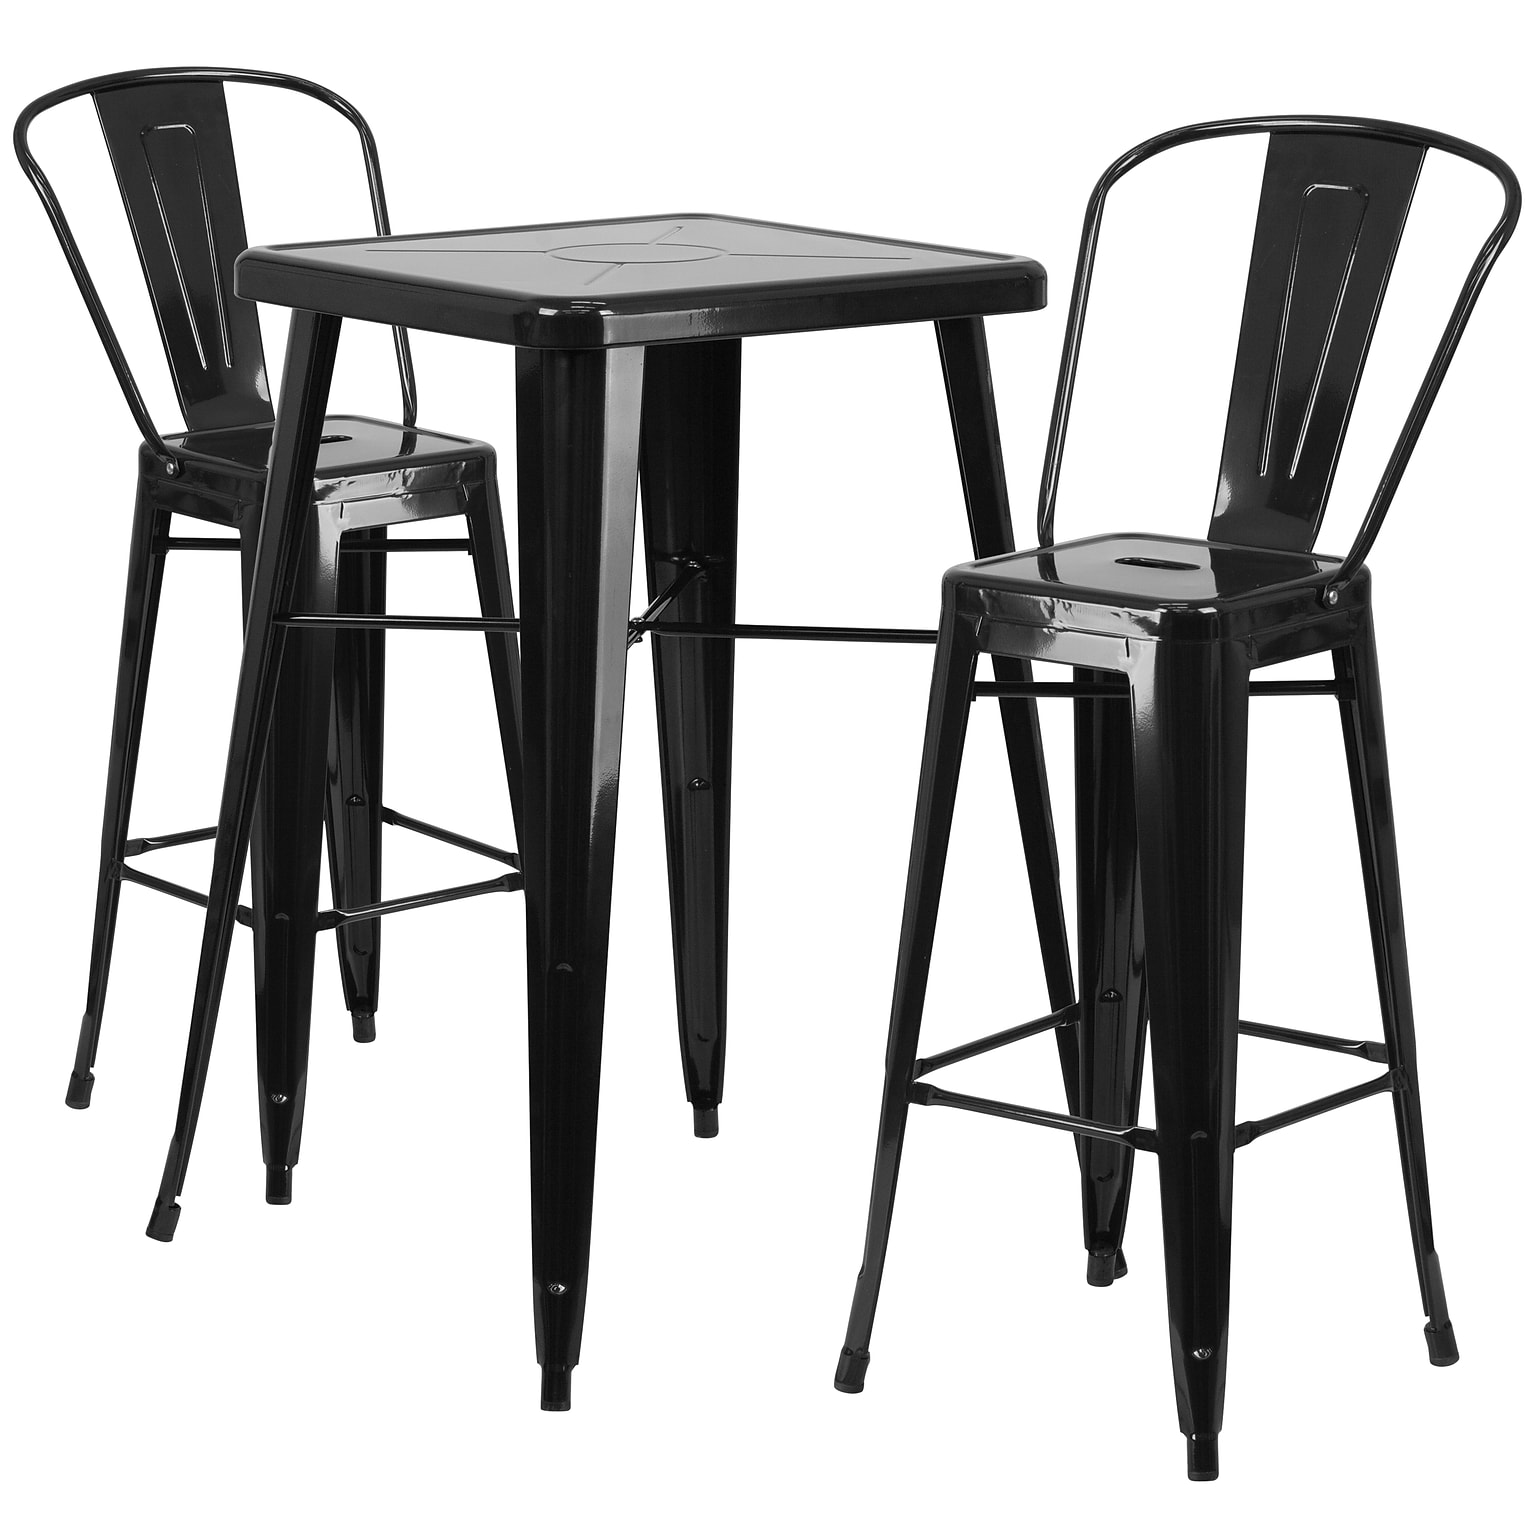 Flash Furniture Gable Indoor-Outdoor Bar Table Set with 2 Stools with Backs, 27.75 x 27.75, Black (CH31330B230GBBK)